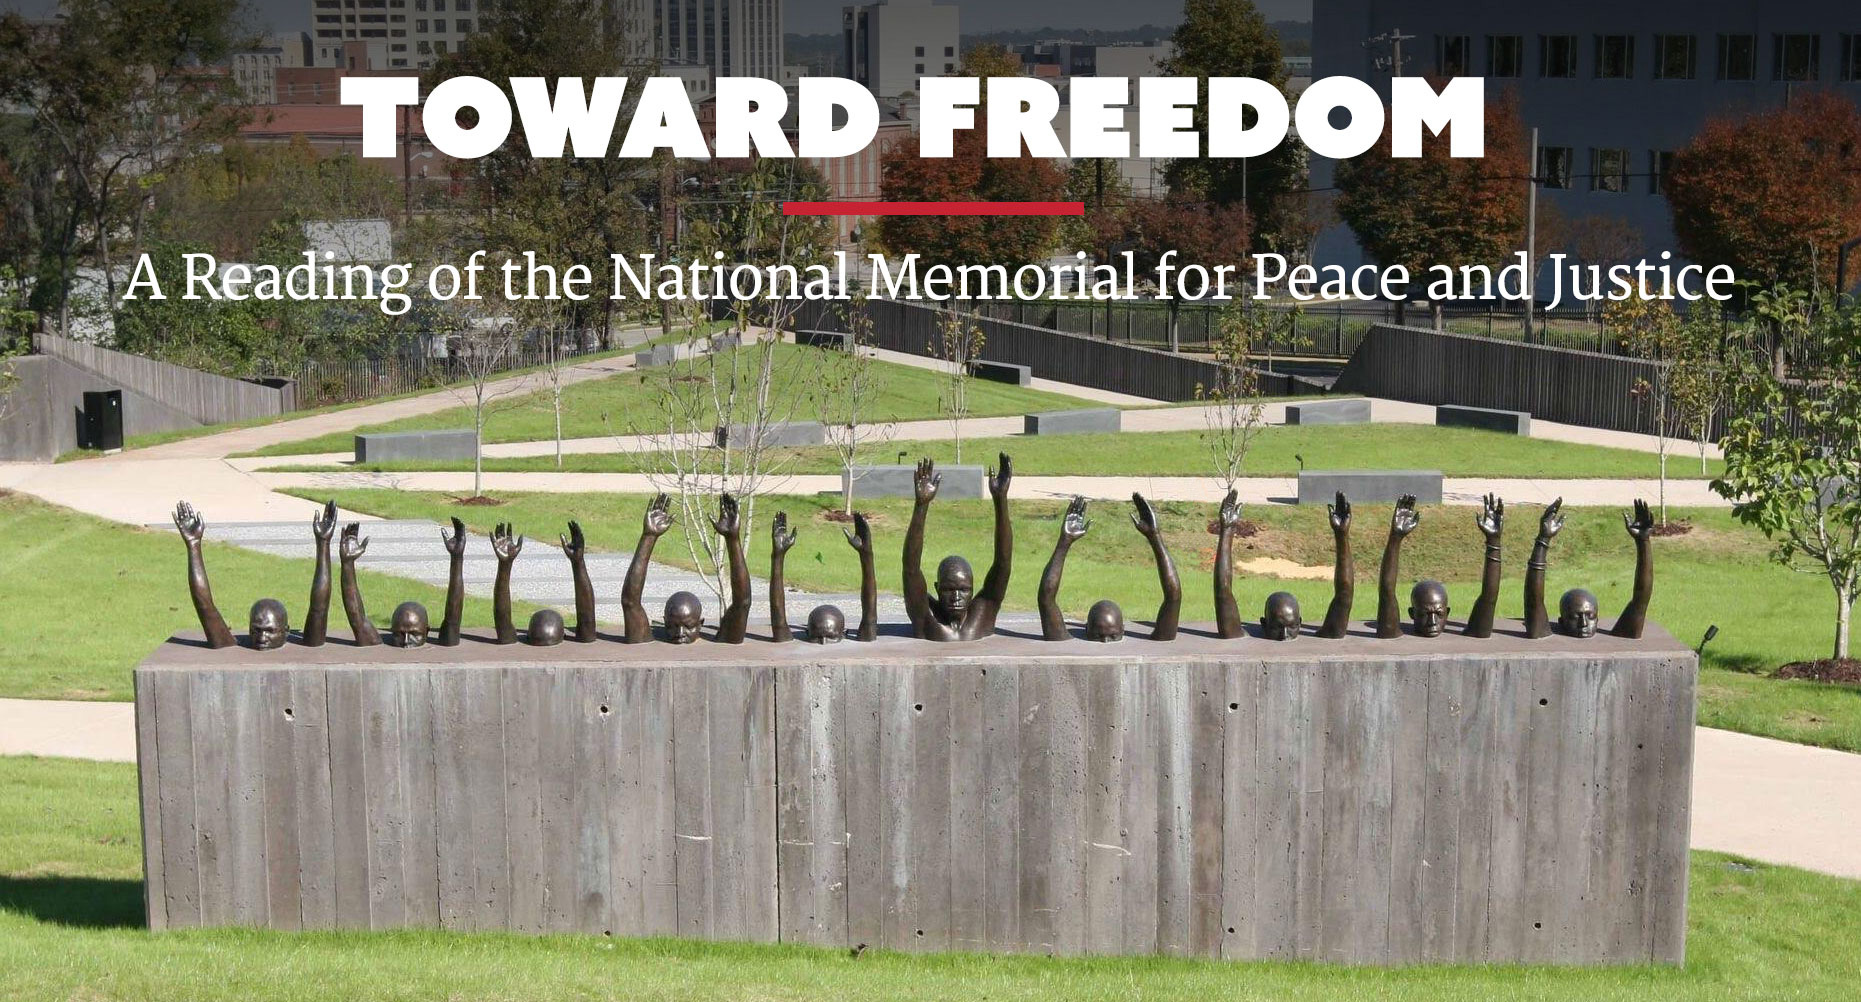 Toward Freedom: A Reading of the National Memorial for Peace and Justice